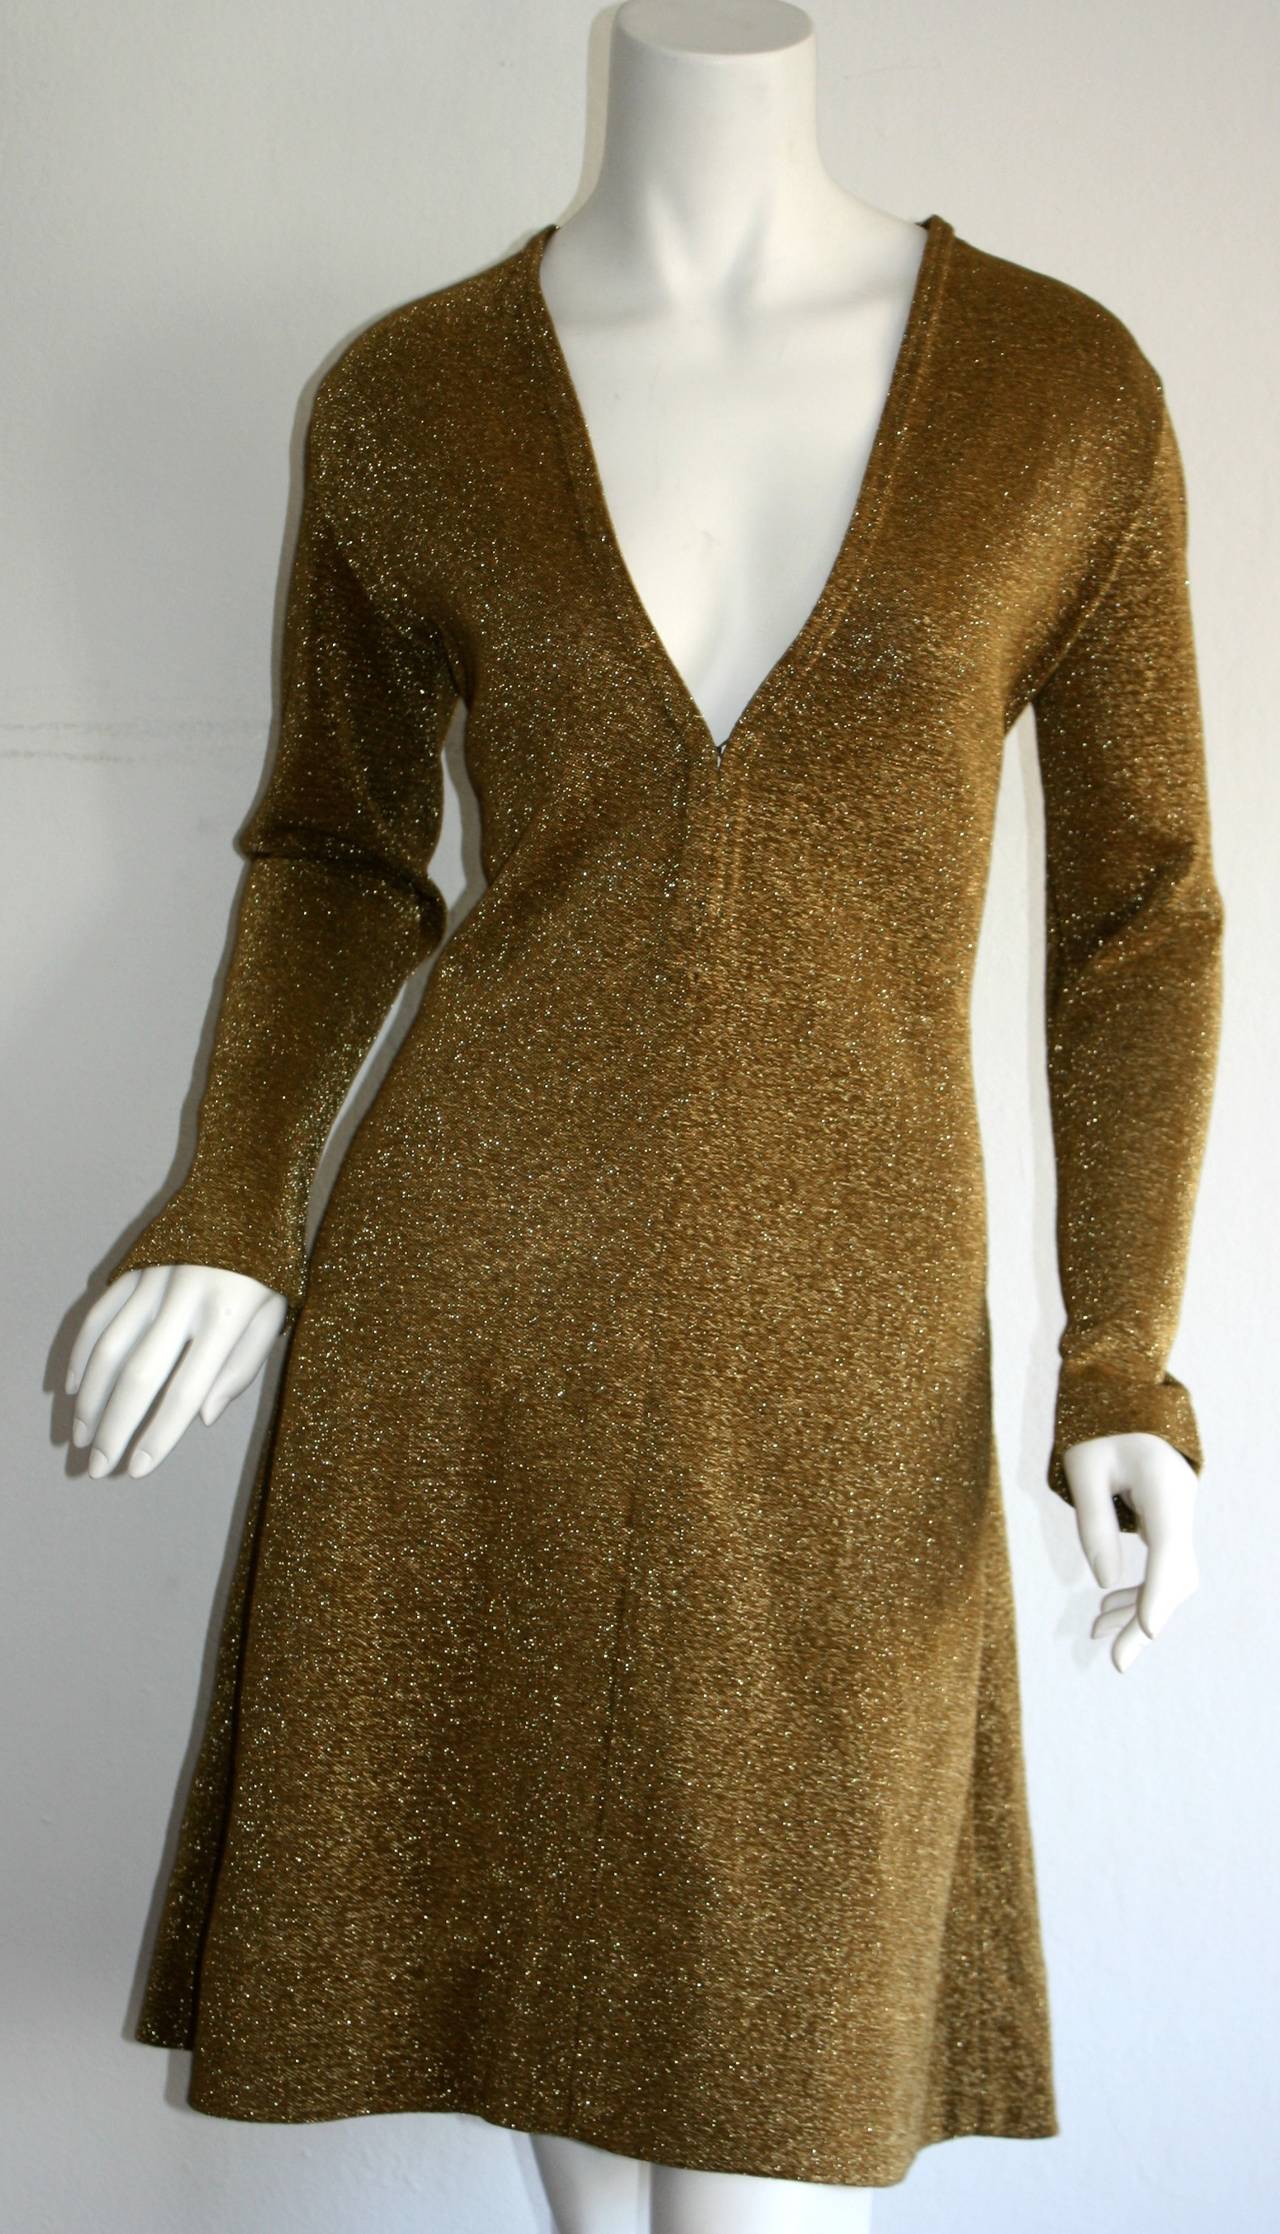 Super rare 1960s Rudi Gernreich for Harmon Knits gold knit dress! Sexy plunge bust, that features hidden hook-and-eyes to control cleavage level. Perfect A-Line shape that is extra flattering. Can be worn for dress or play. Looks great for a